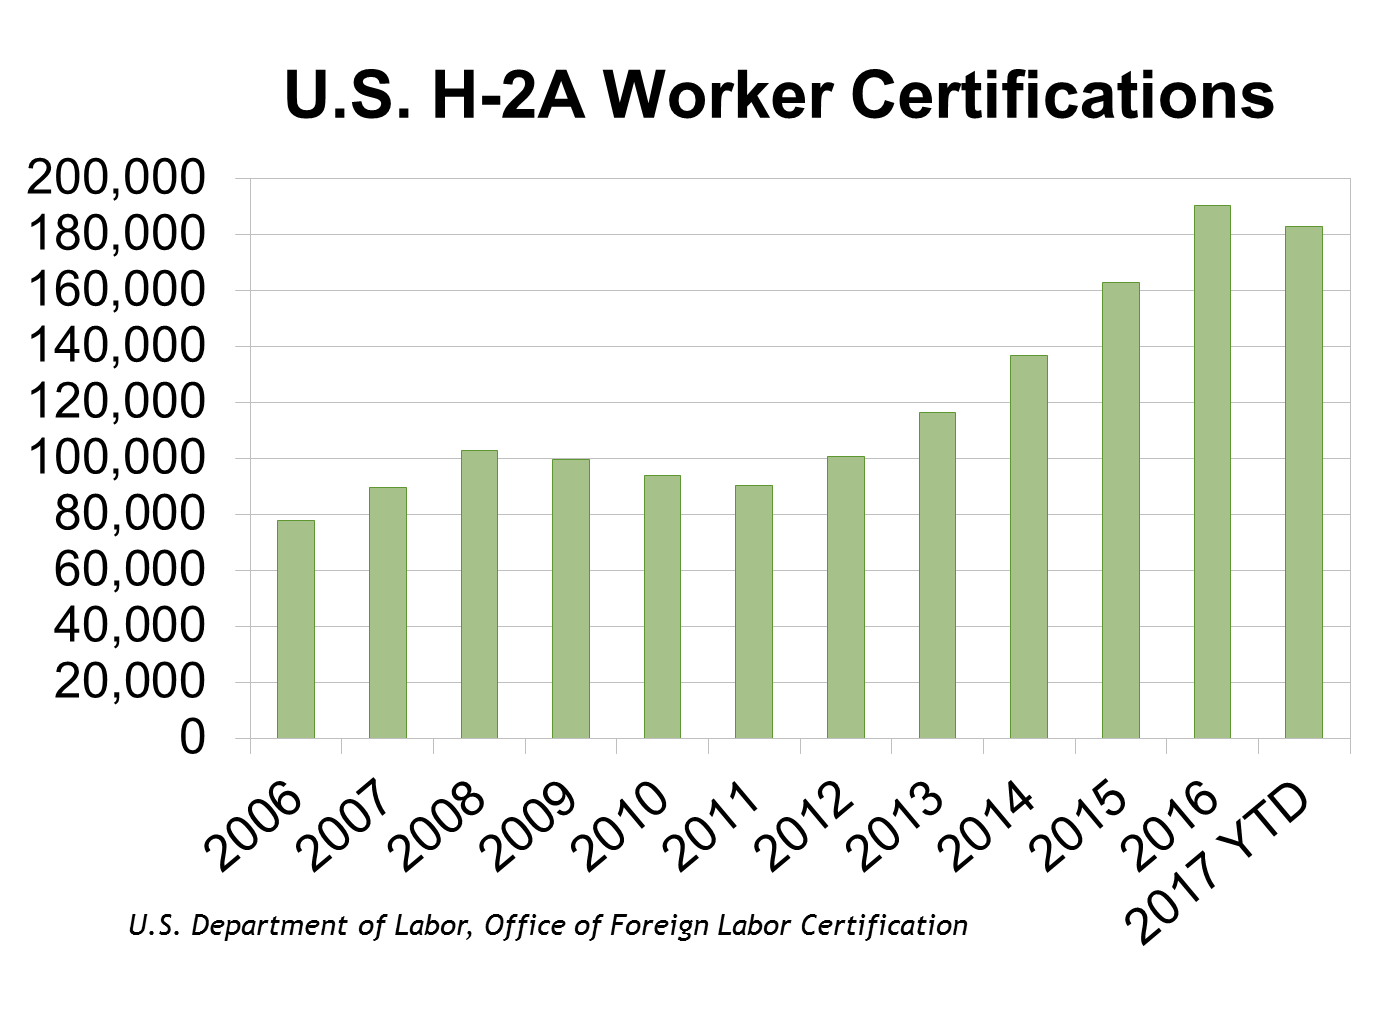 H-2A Usage Approaches 200,000 Workers | Preparing the Next Generation for Farm Management